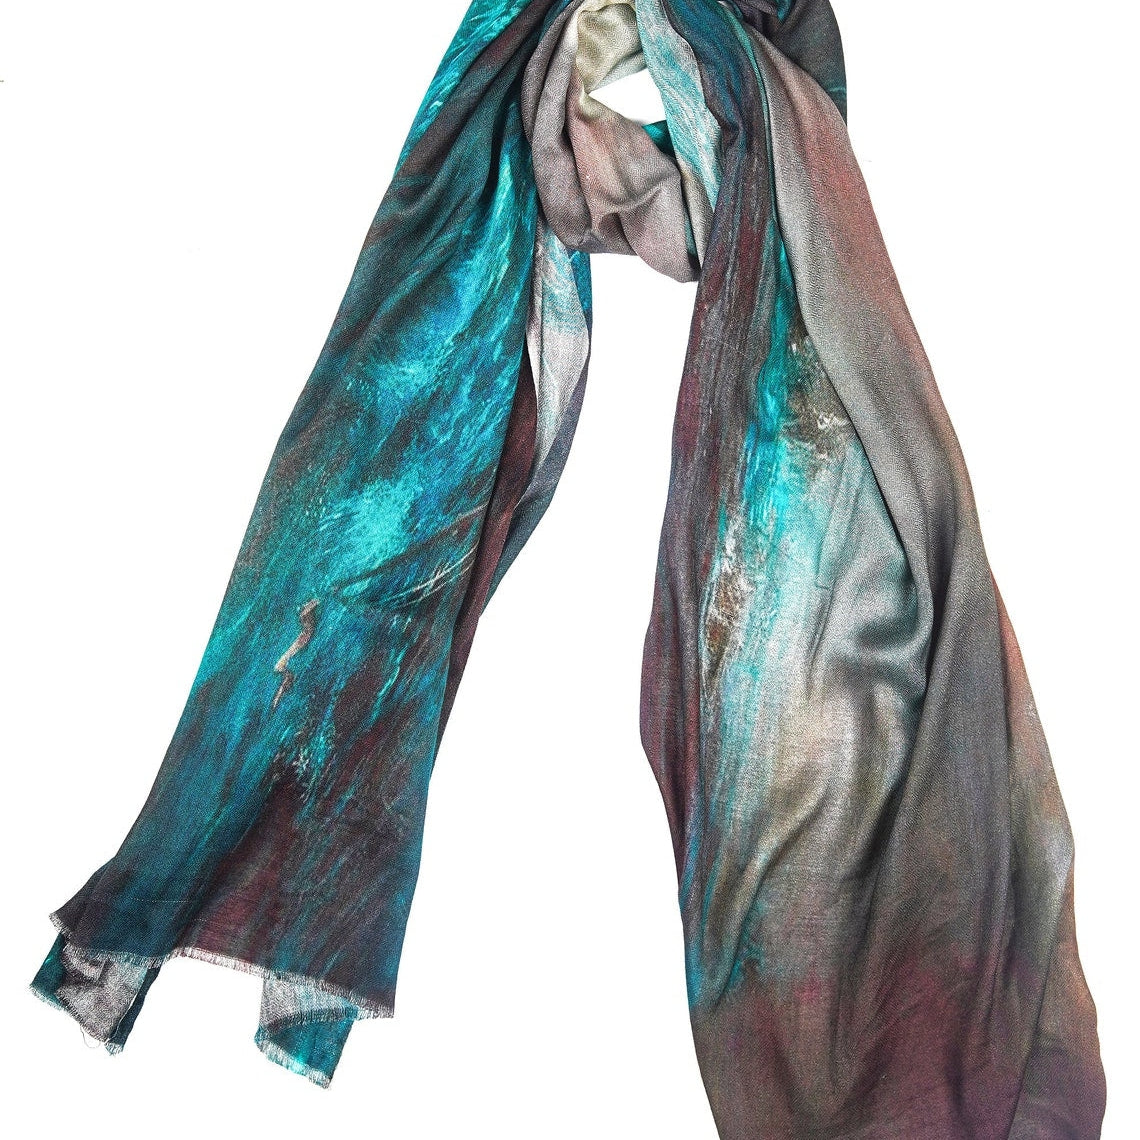 Silk Modal Scarf, long all season scarf in luxurious fabric blend, shawl and wrap, accessories for women, gifts for her, summer scarf, shawl - Ocean Blue